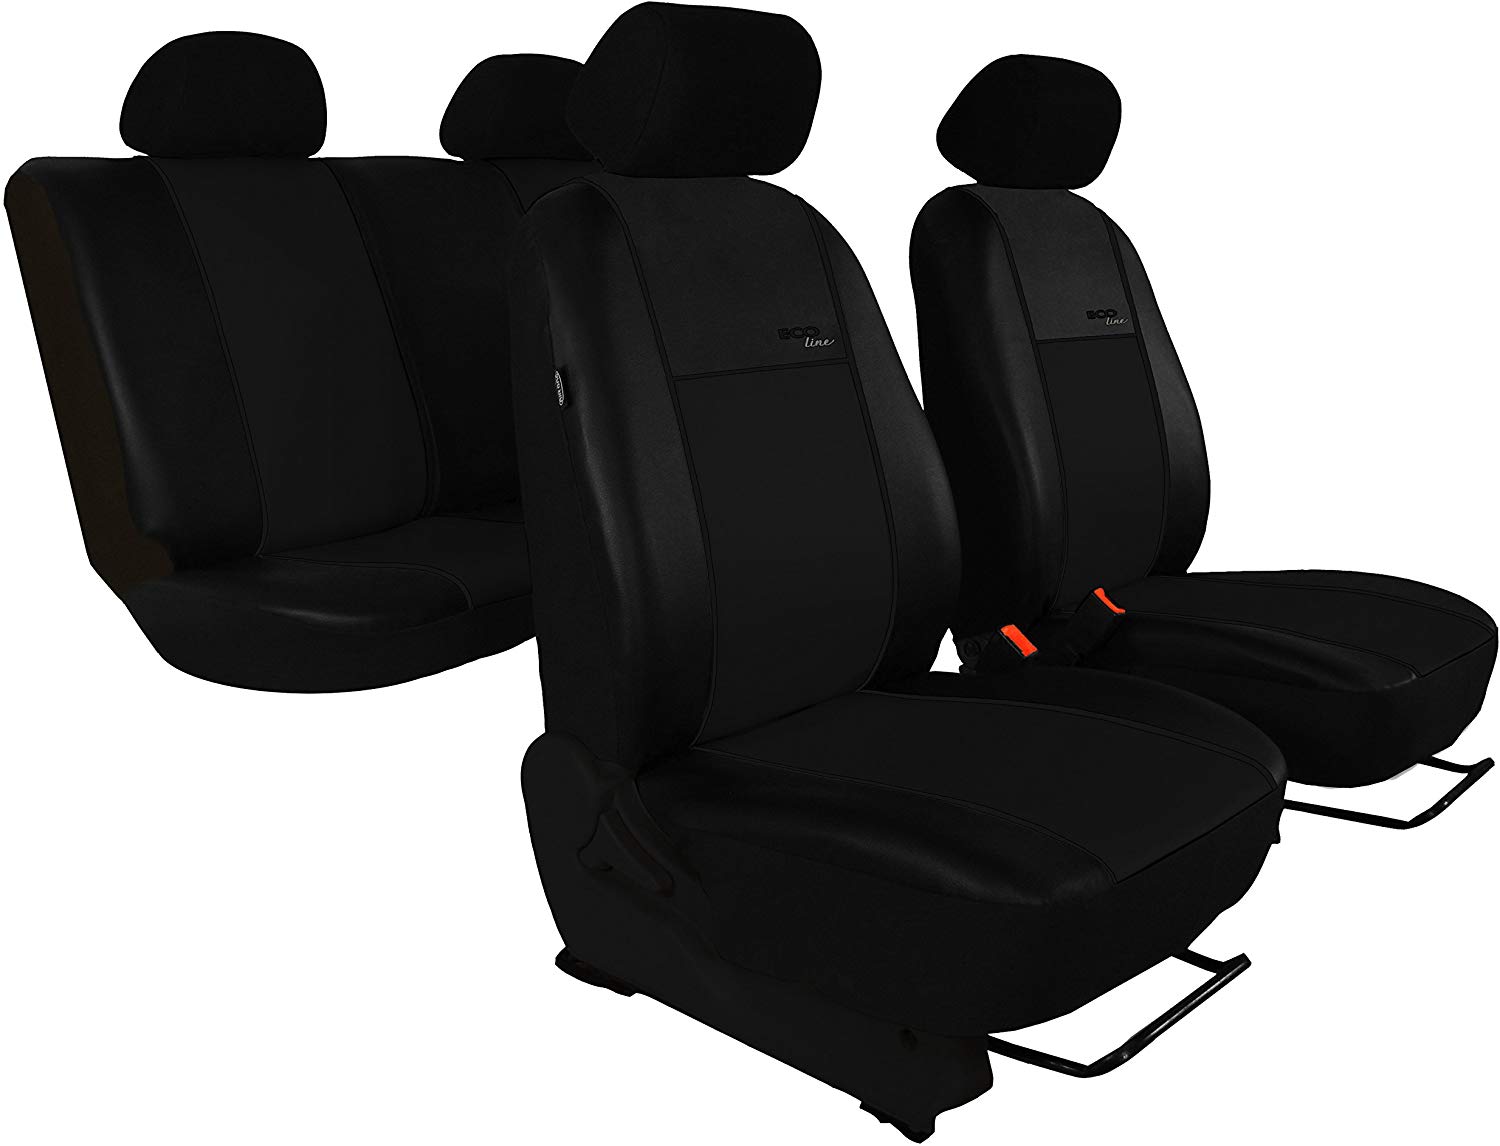 Customised Seat Covers High Quality for Audi A6 °C6 Design Eco-Line () Available in 7 Colors)